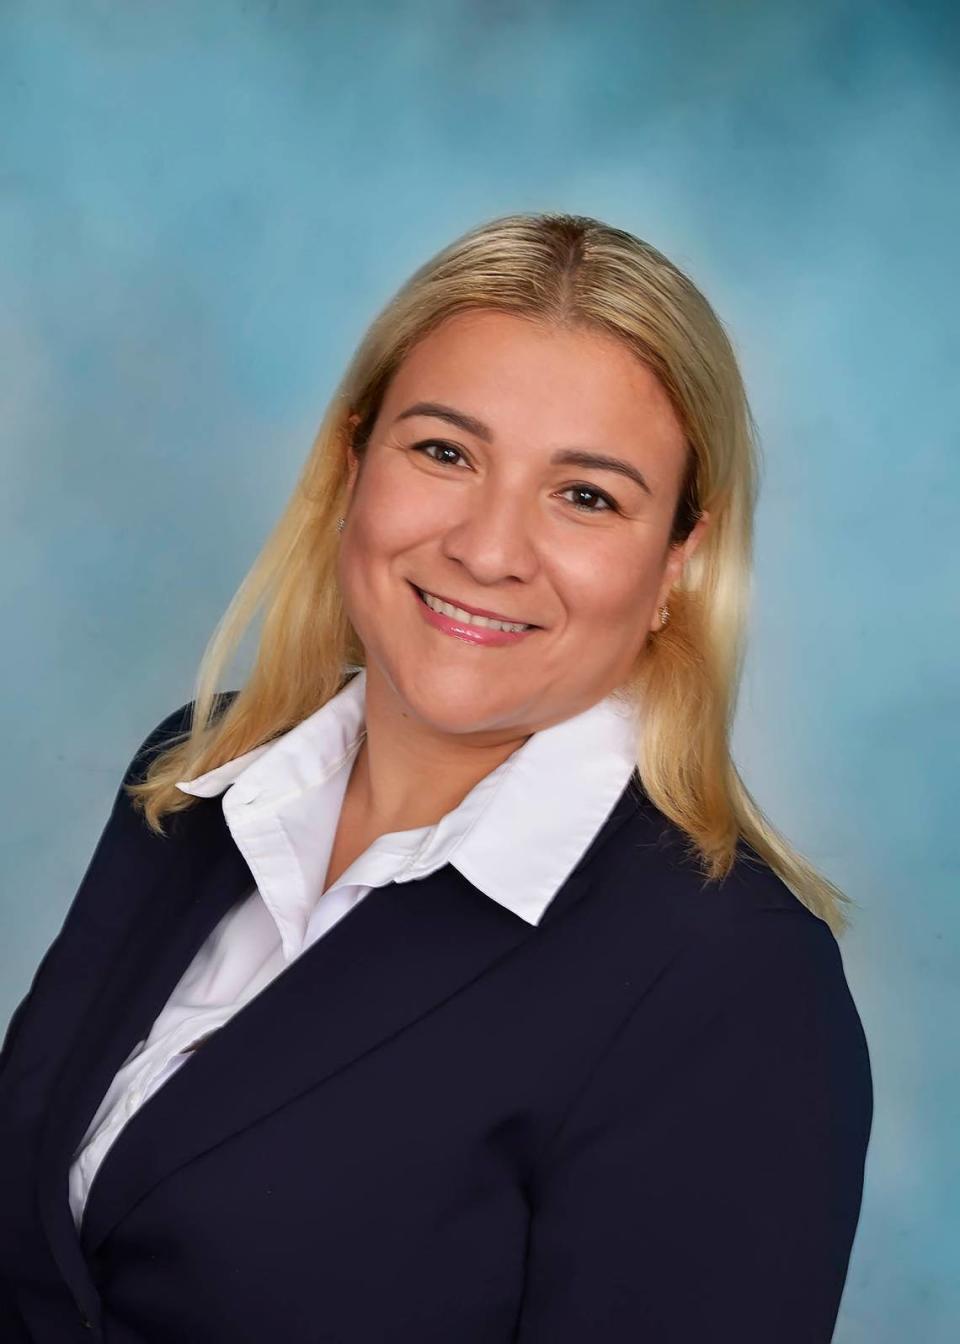 Claudia Rainville is running for the District 11 seat on the Miami-Dade County Commission.